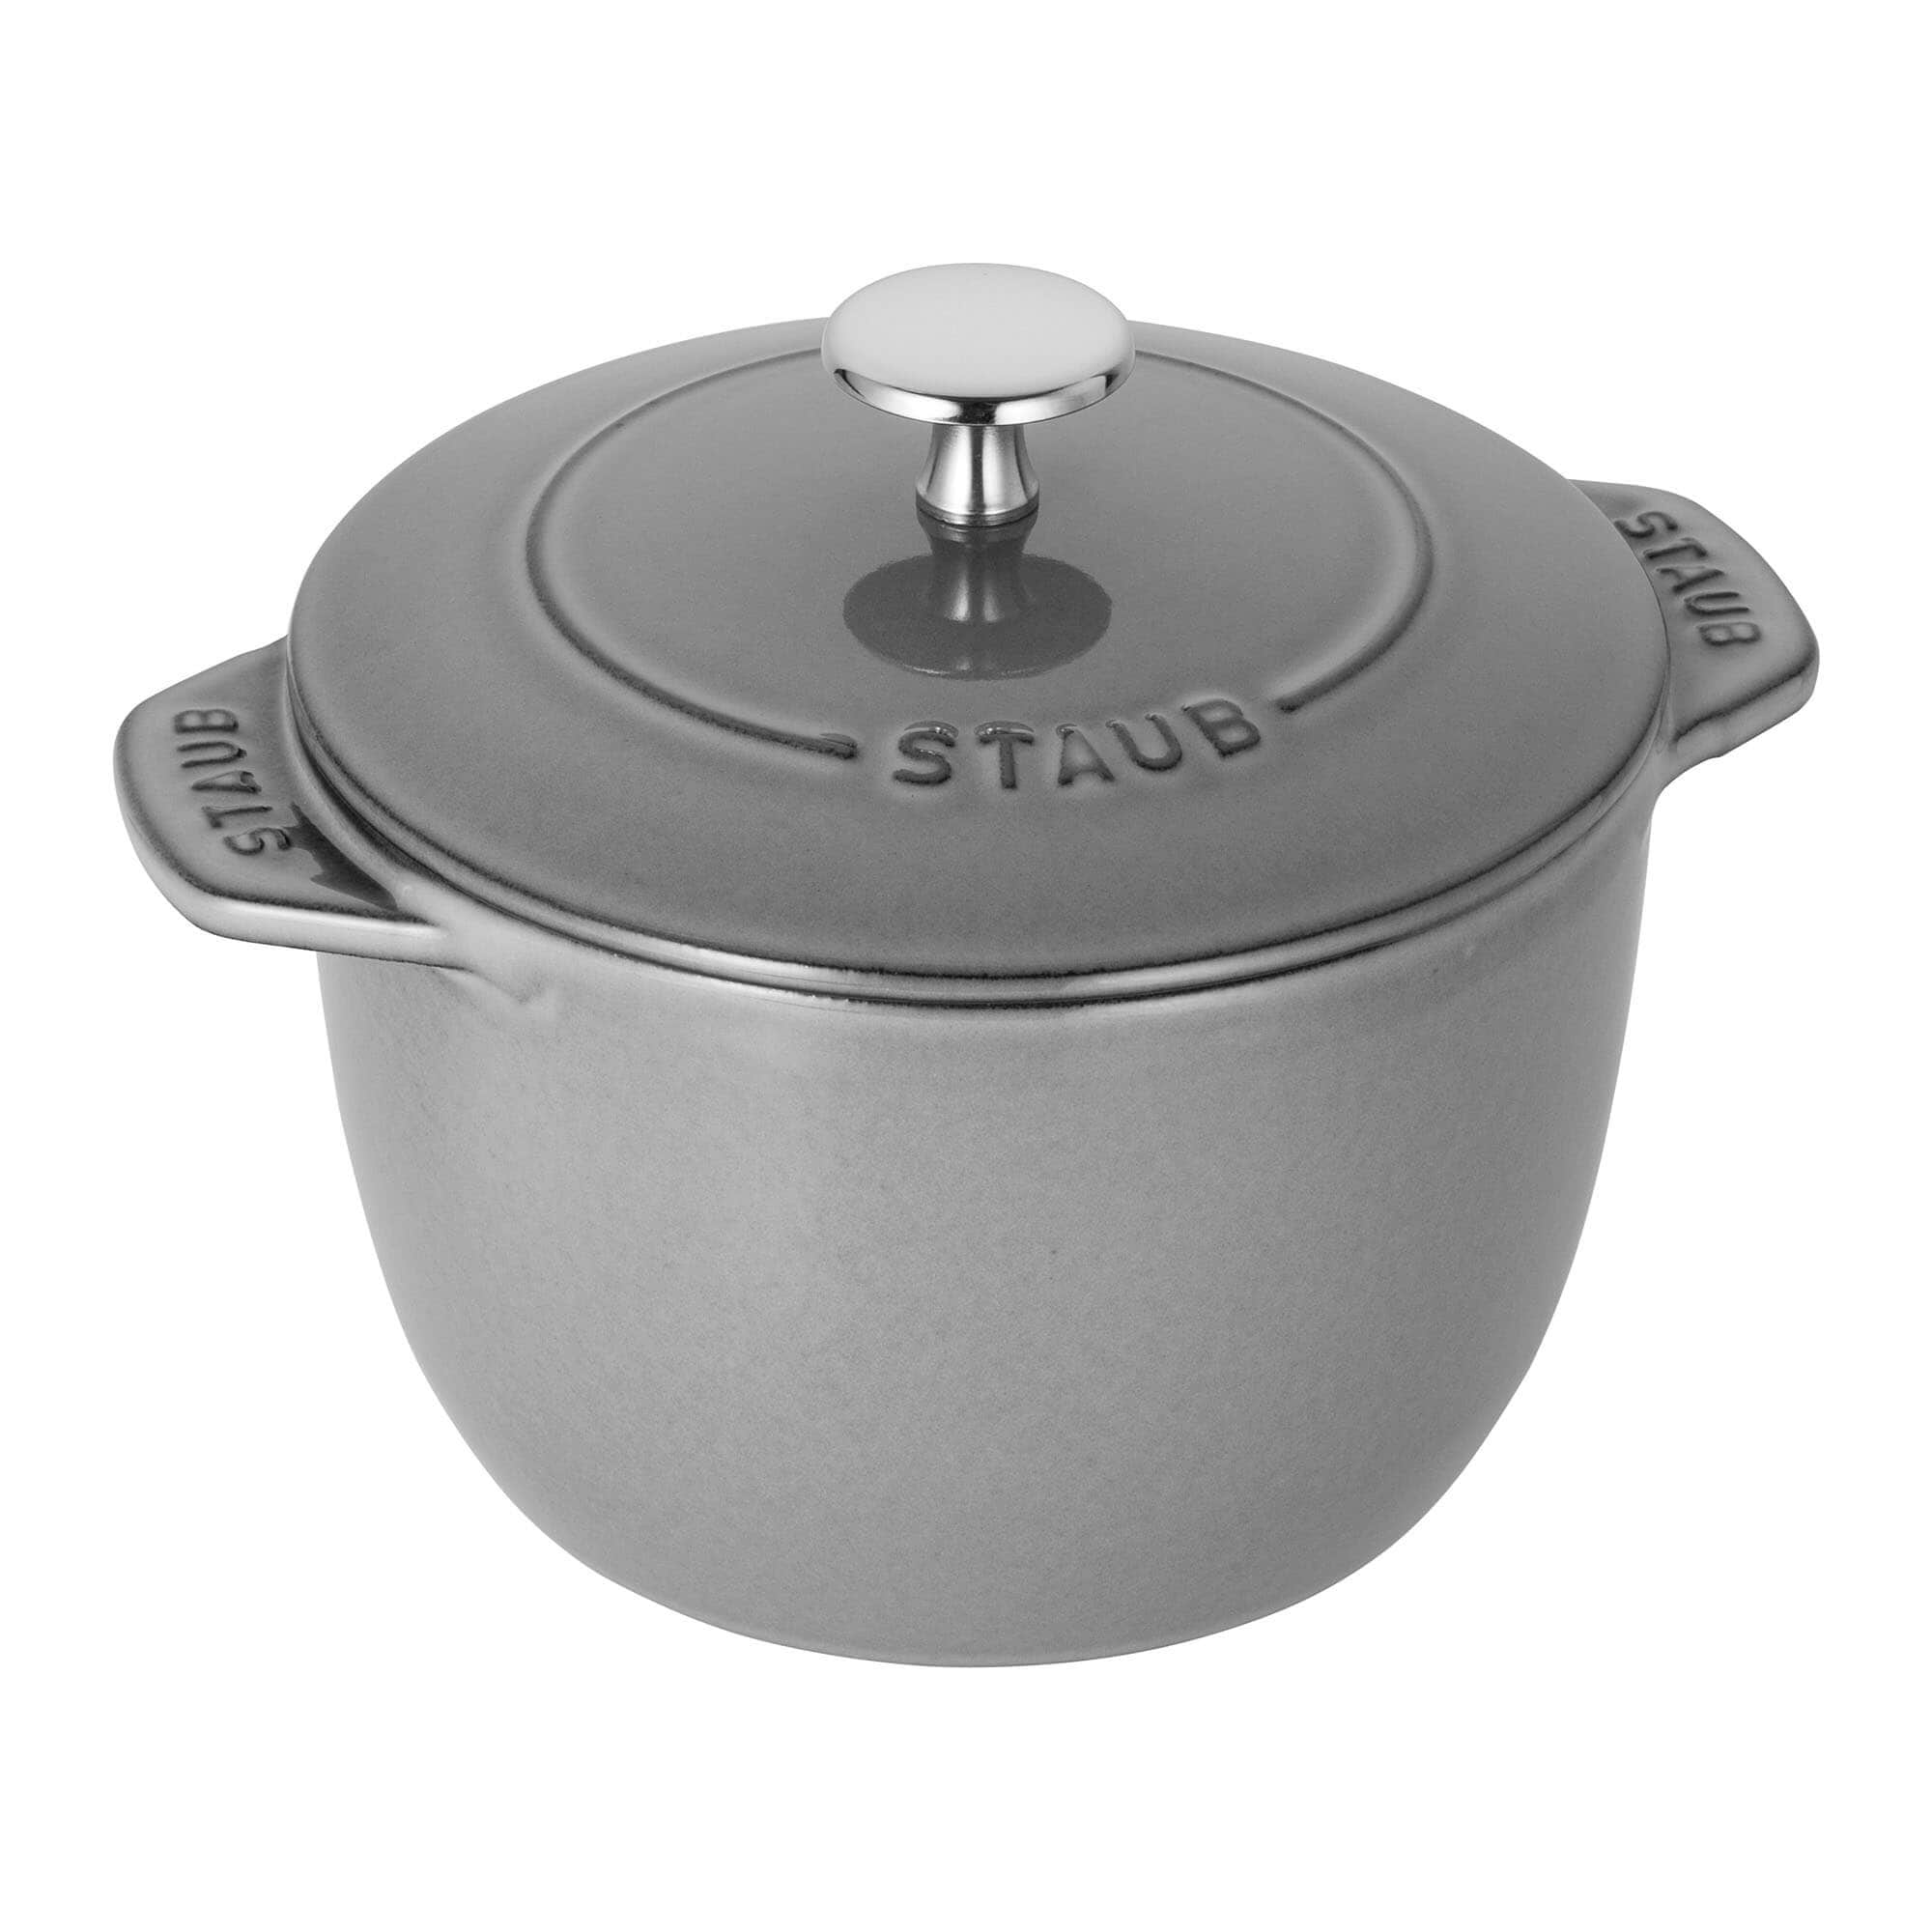 https://ak1.ostkcdn.com/images/products/is/images/direct/9ea247cfda00801d40f7748b5ee66016f34eeecf/STAUB-Cast-Iron-1.5-qt-Petite-French-Oven.jpg